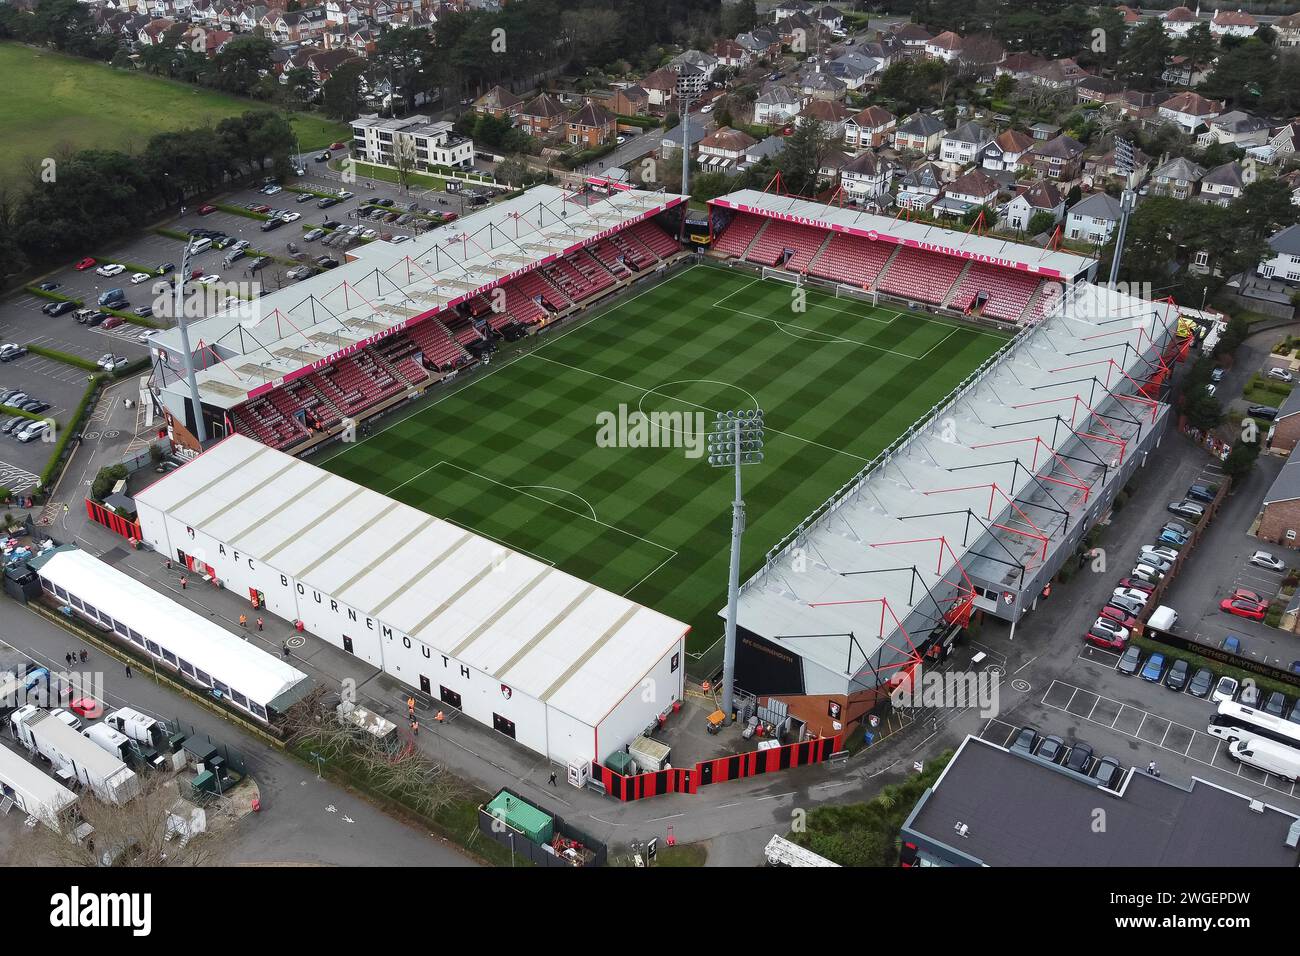 Aerial view of the Vitality Stadium at Kings Park at Bournemouth in Dorset which is the home of Premier League football club AFC Bournemouth. Stock Photo